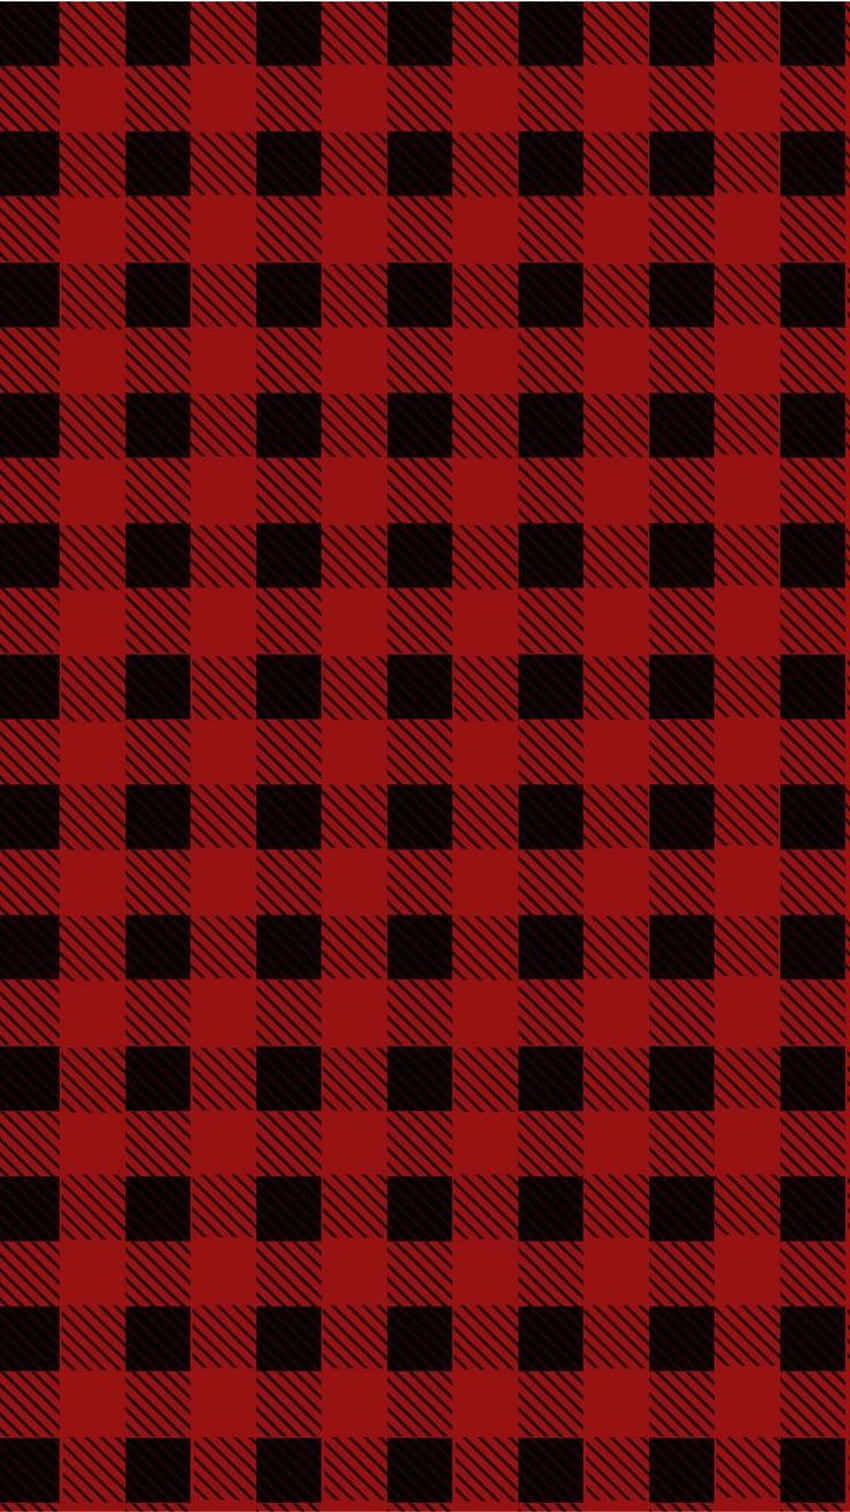 Red Plaid PNG Picture Christmas Red And Black Plaid Background Christmas  Festival Tartan PNG Image For Free Download  Papéis de parede natalinos  Banner natal Fotos natalinas